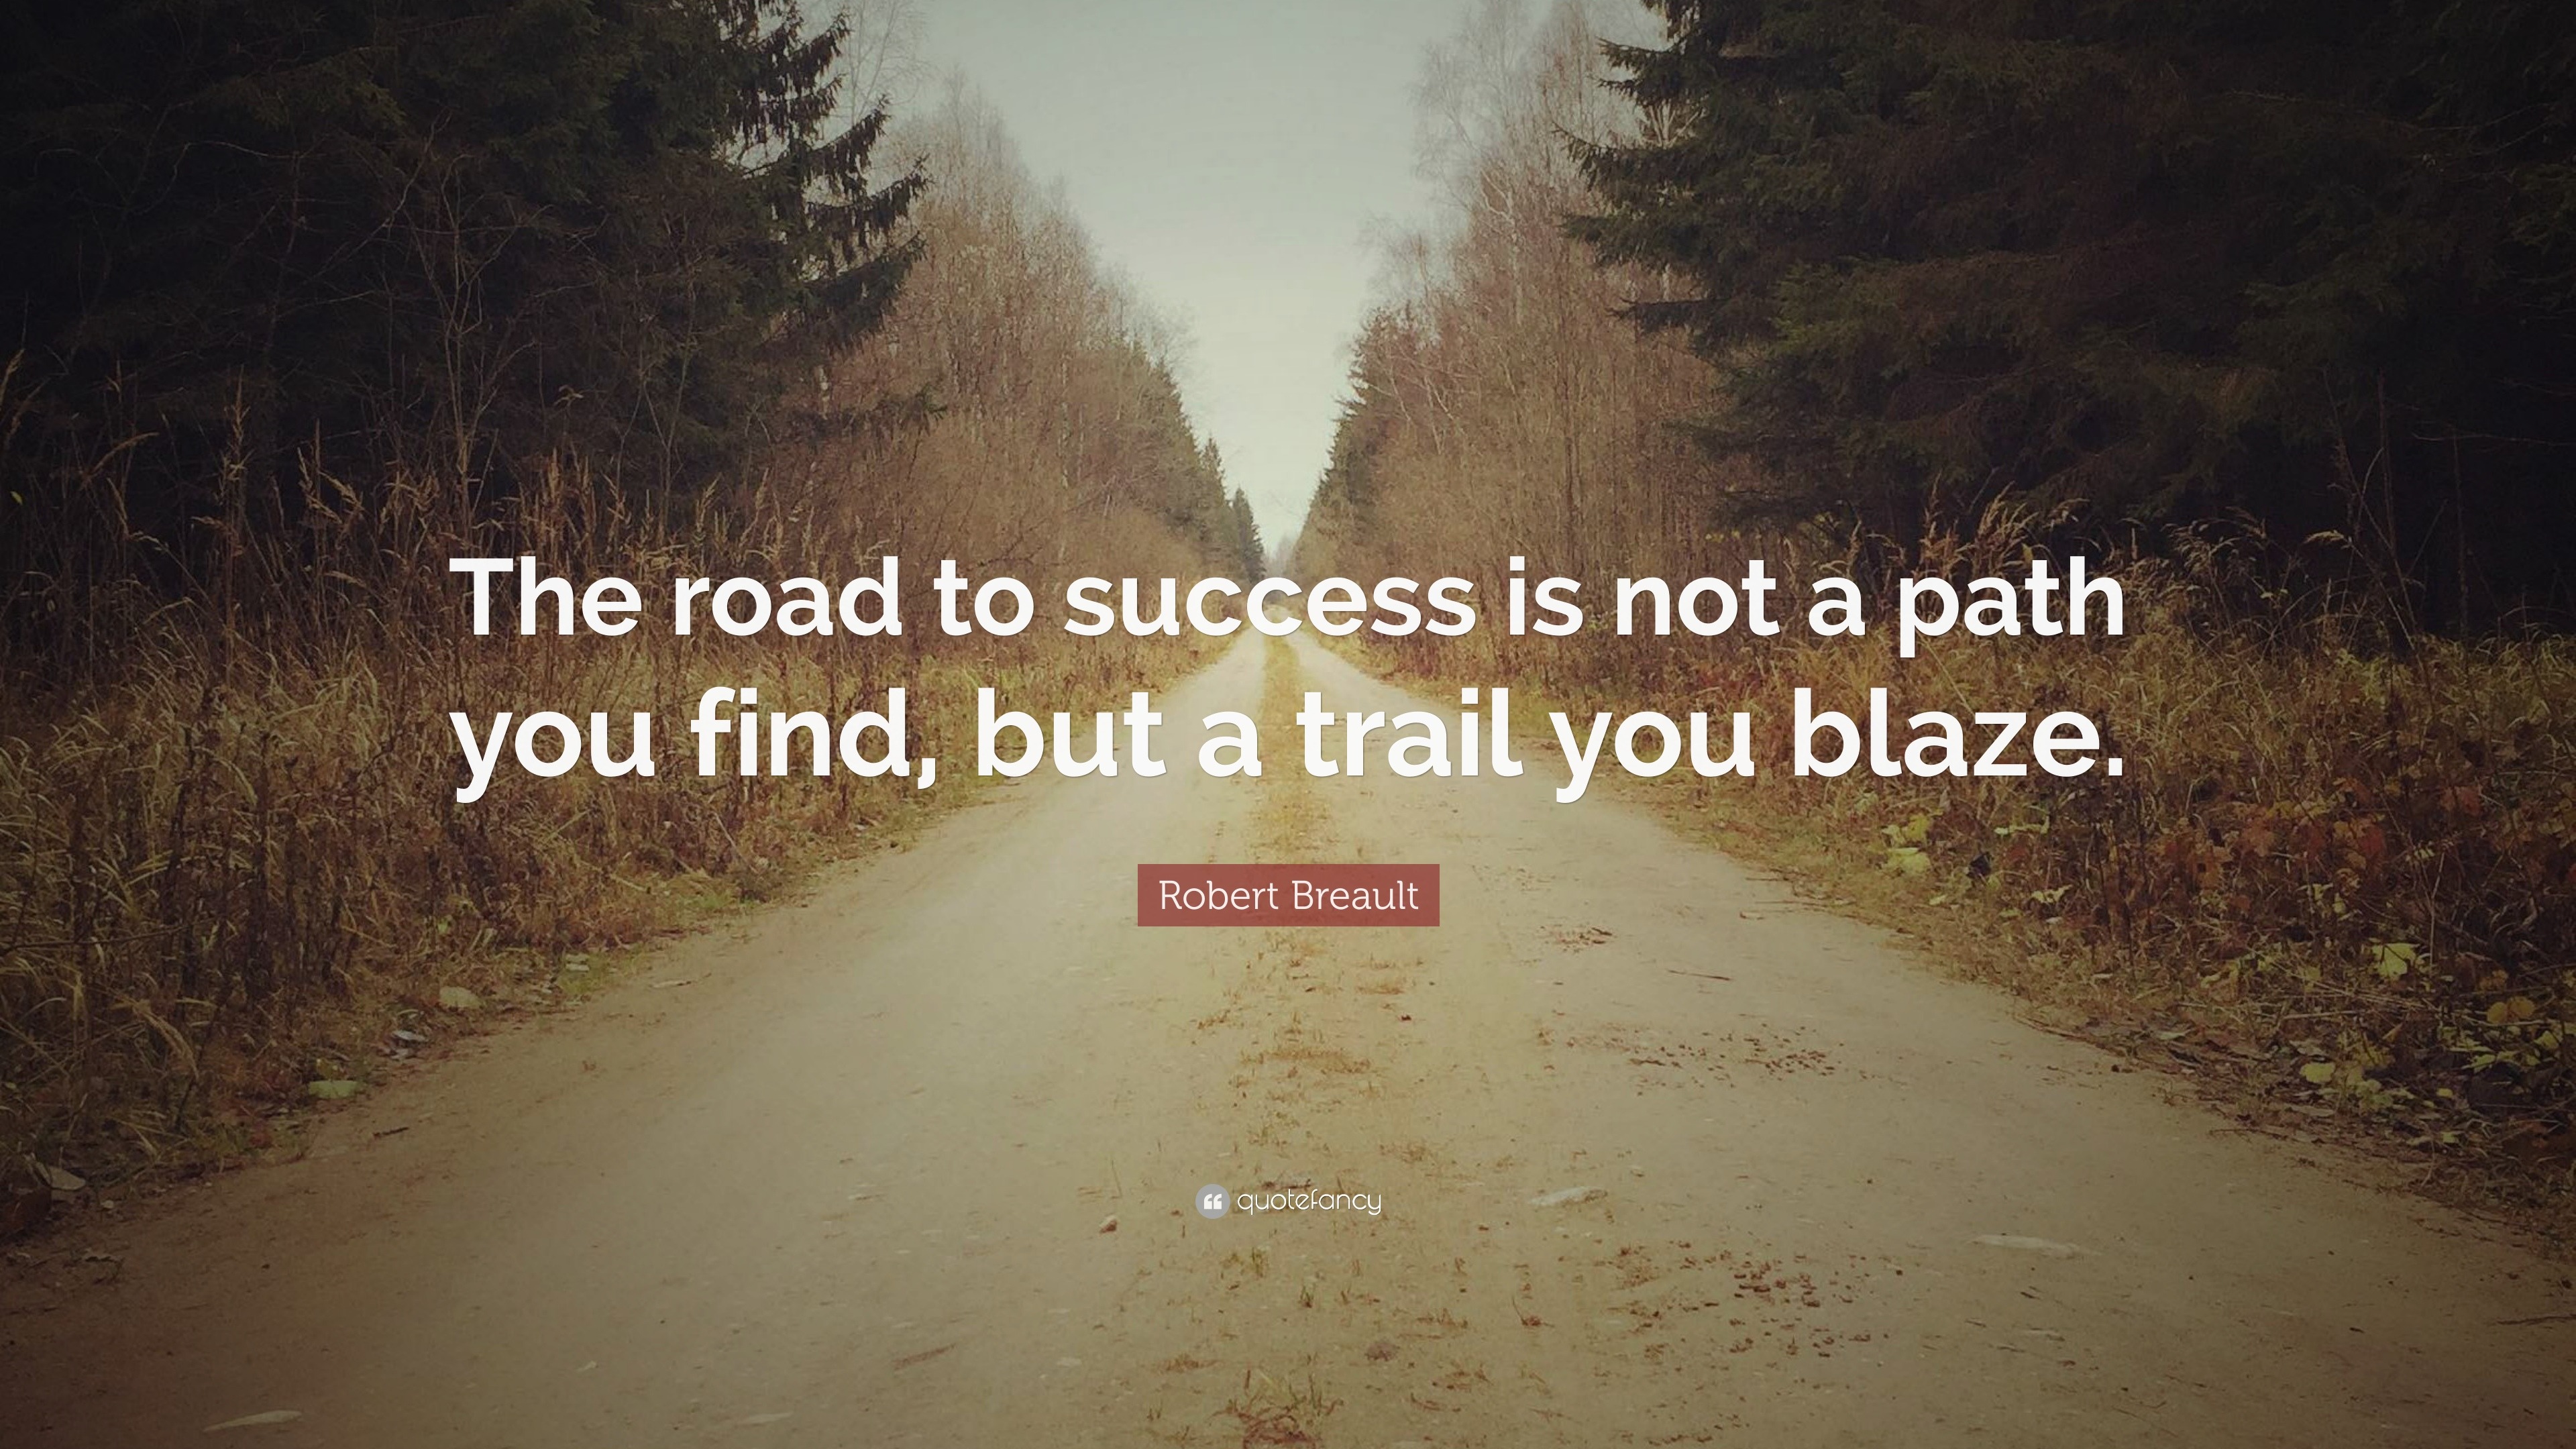 Robert Breault Quote The Road To Success Is Not A Path You Find But A Trail You Blaze